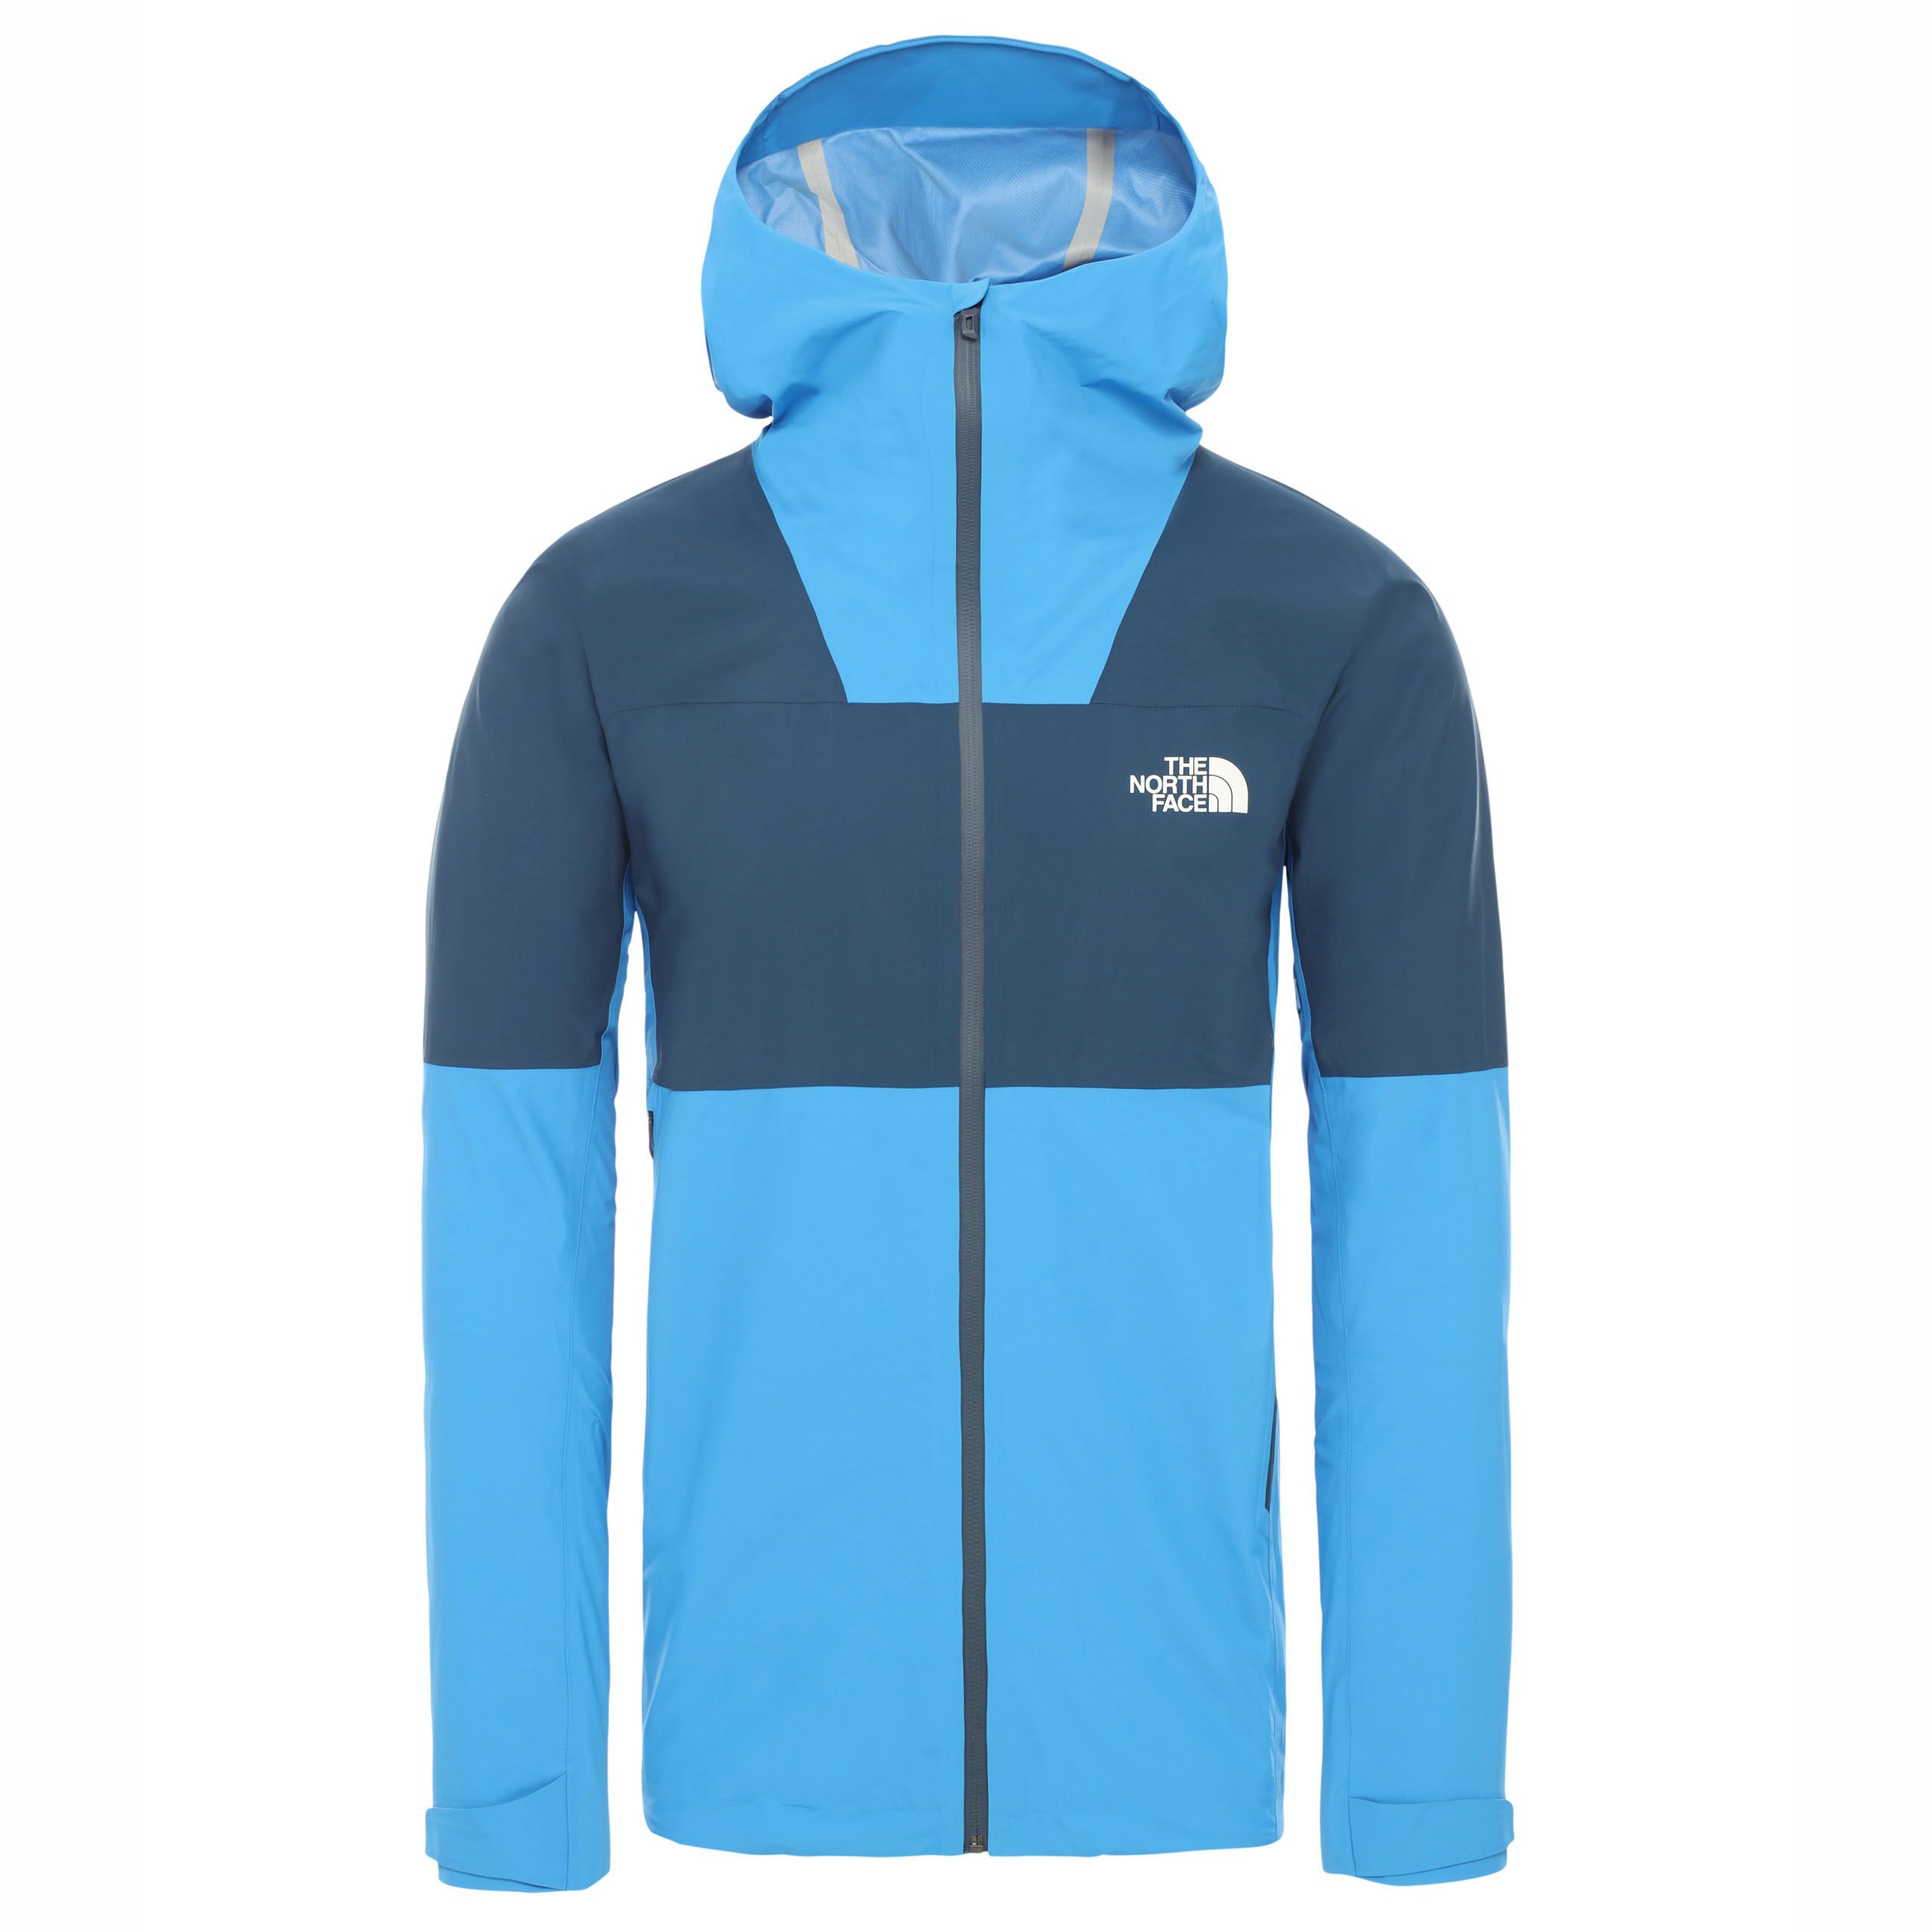 The North Face Mens 2.5l Impendor Waterproof Jacket